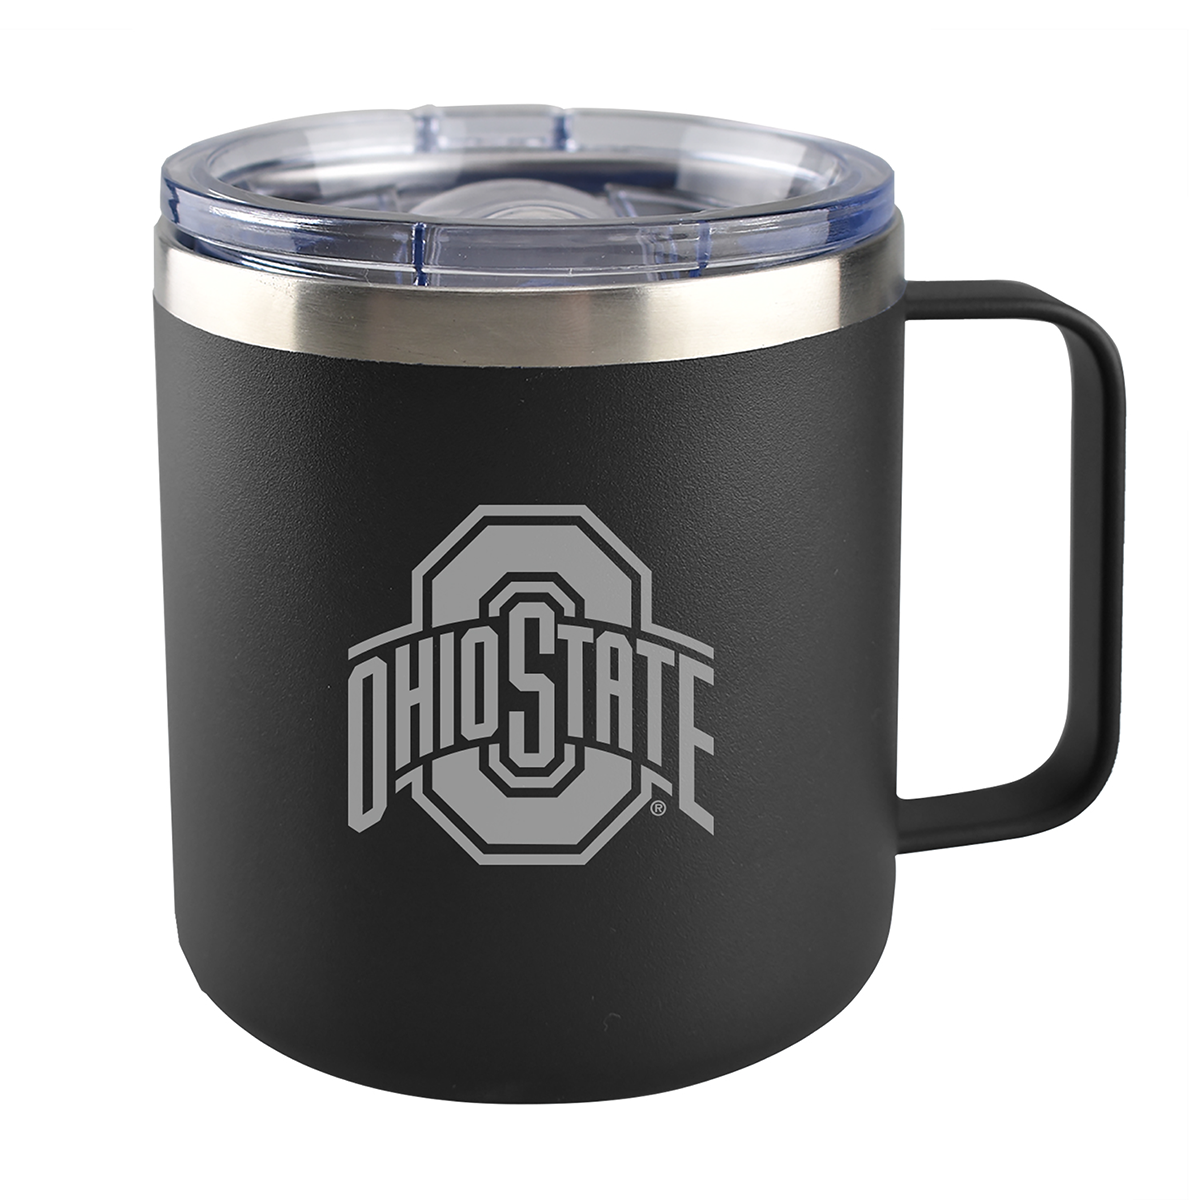 The Ohio State University Cups and Mugs, The Ohio State University